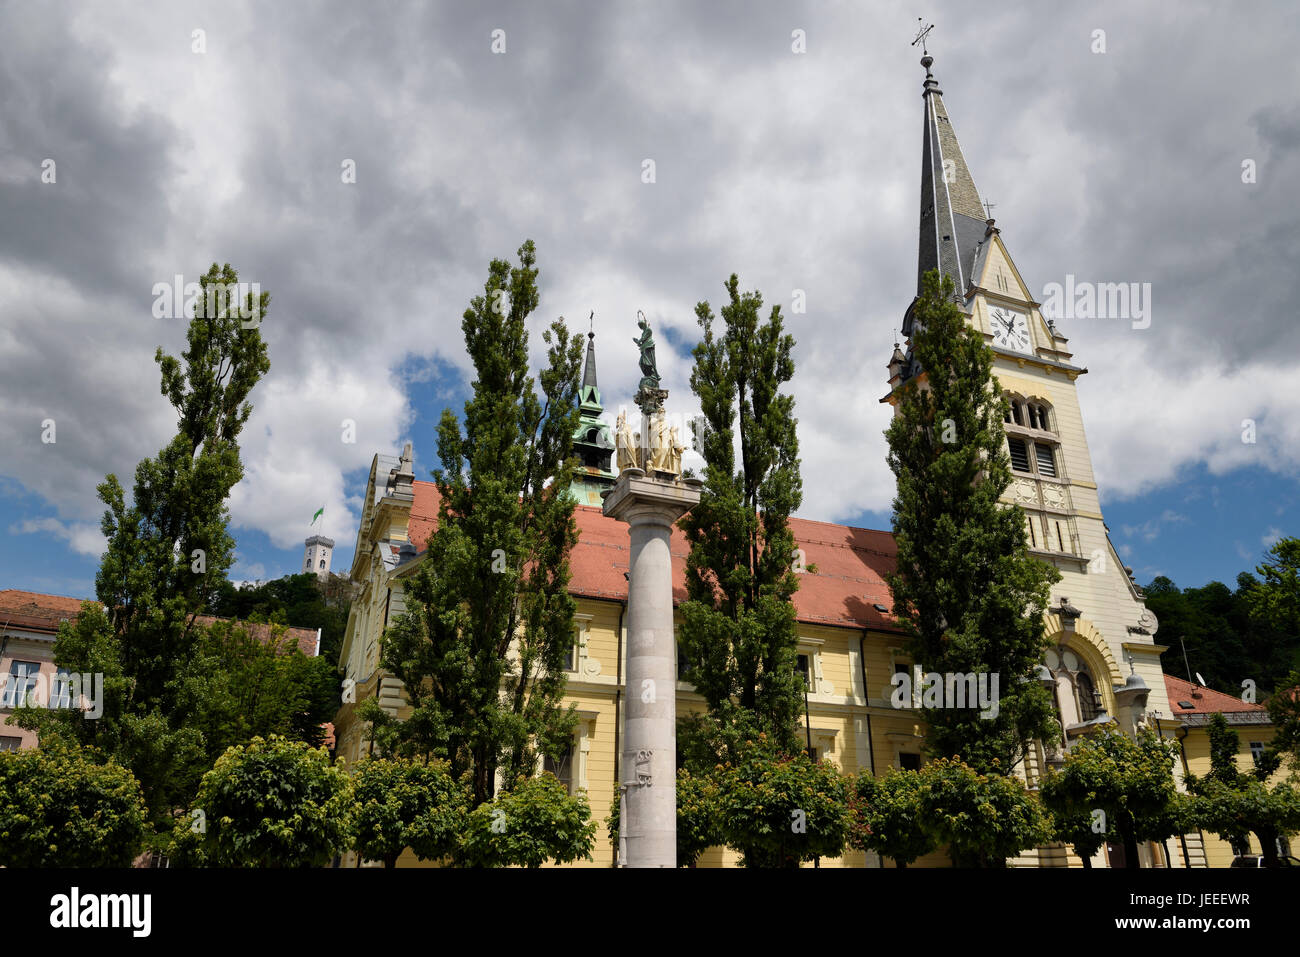 St James parish Catholic church and St. Mary's Column of the virgin in brass and stone statues of saints Ljubljana Slovenia with tower on Castle Hill Stock Photo